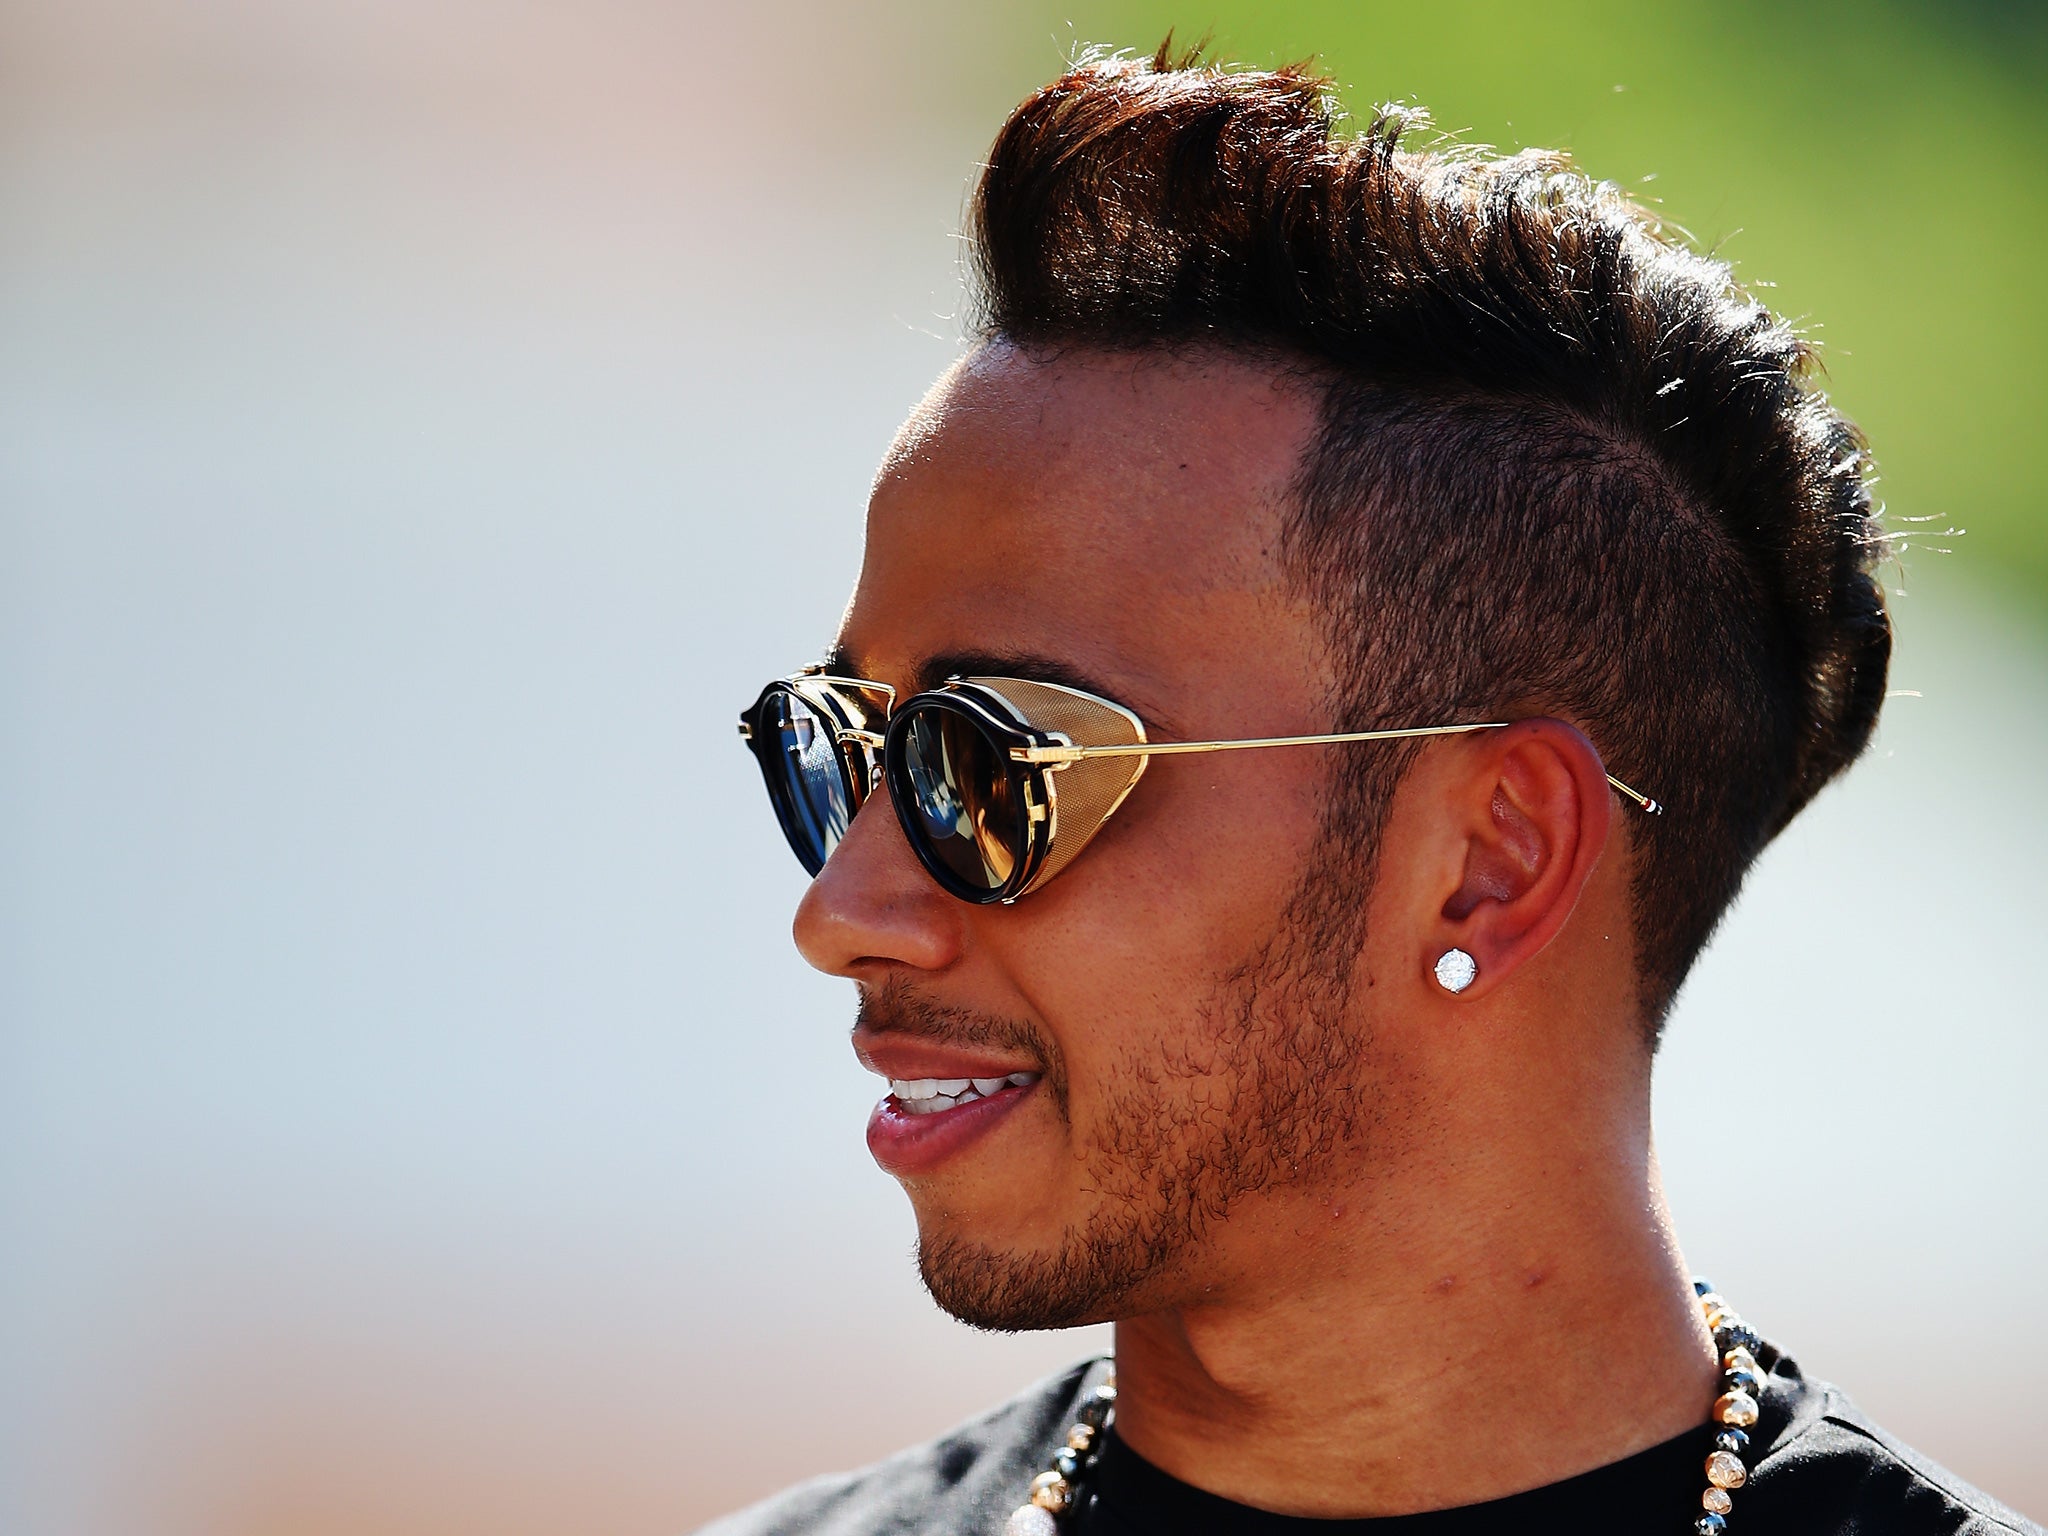 Lewis Hamilton is looking forward to driving a car that has been specifically designed and built for him